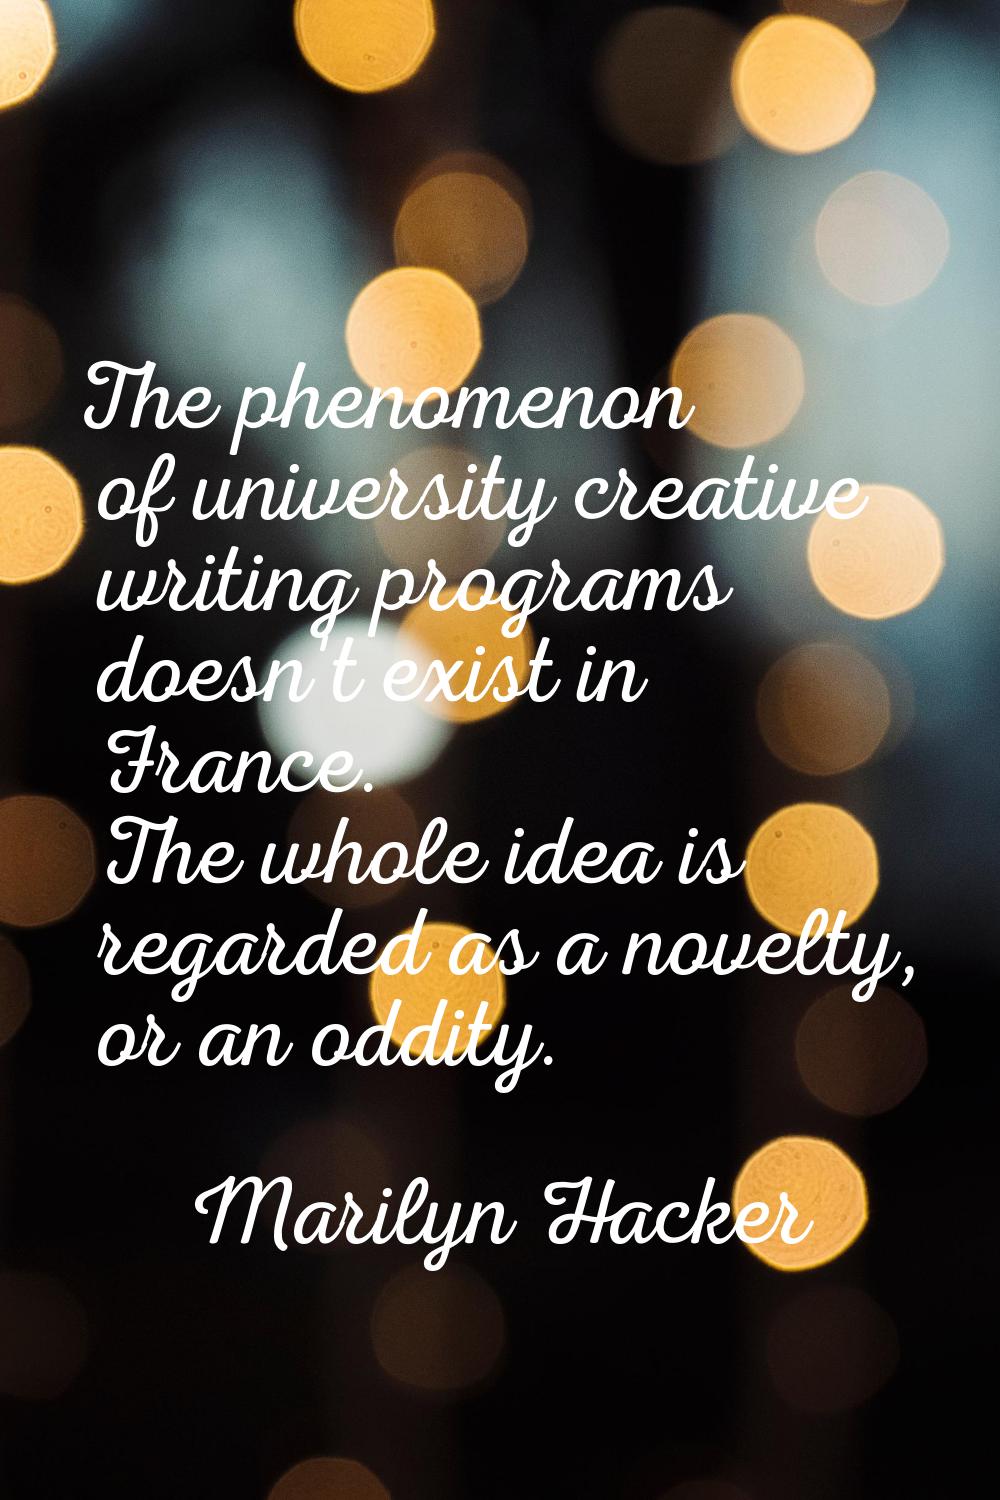 The phenomenon of university creative writing programs doesn't exist in France. The whole idea is r